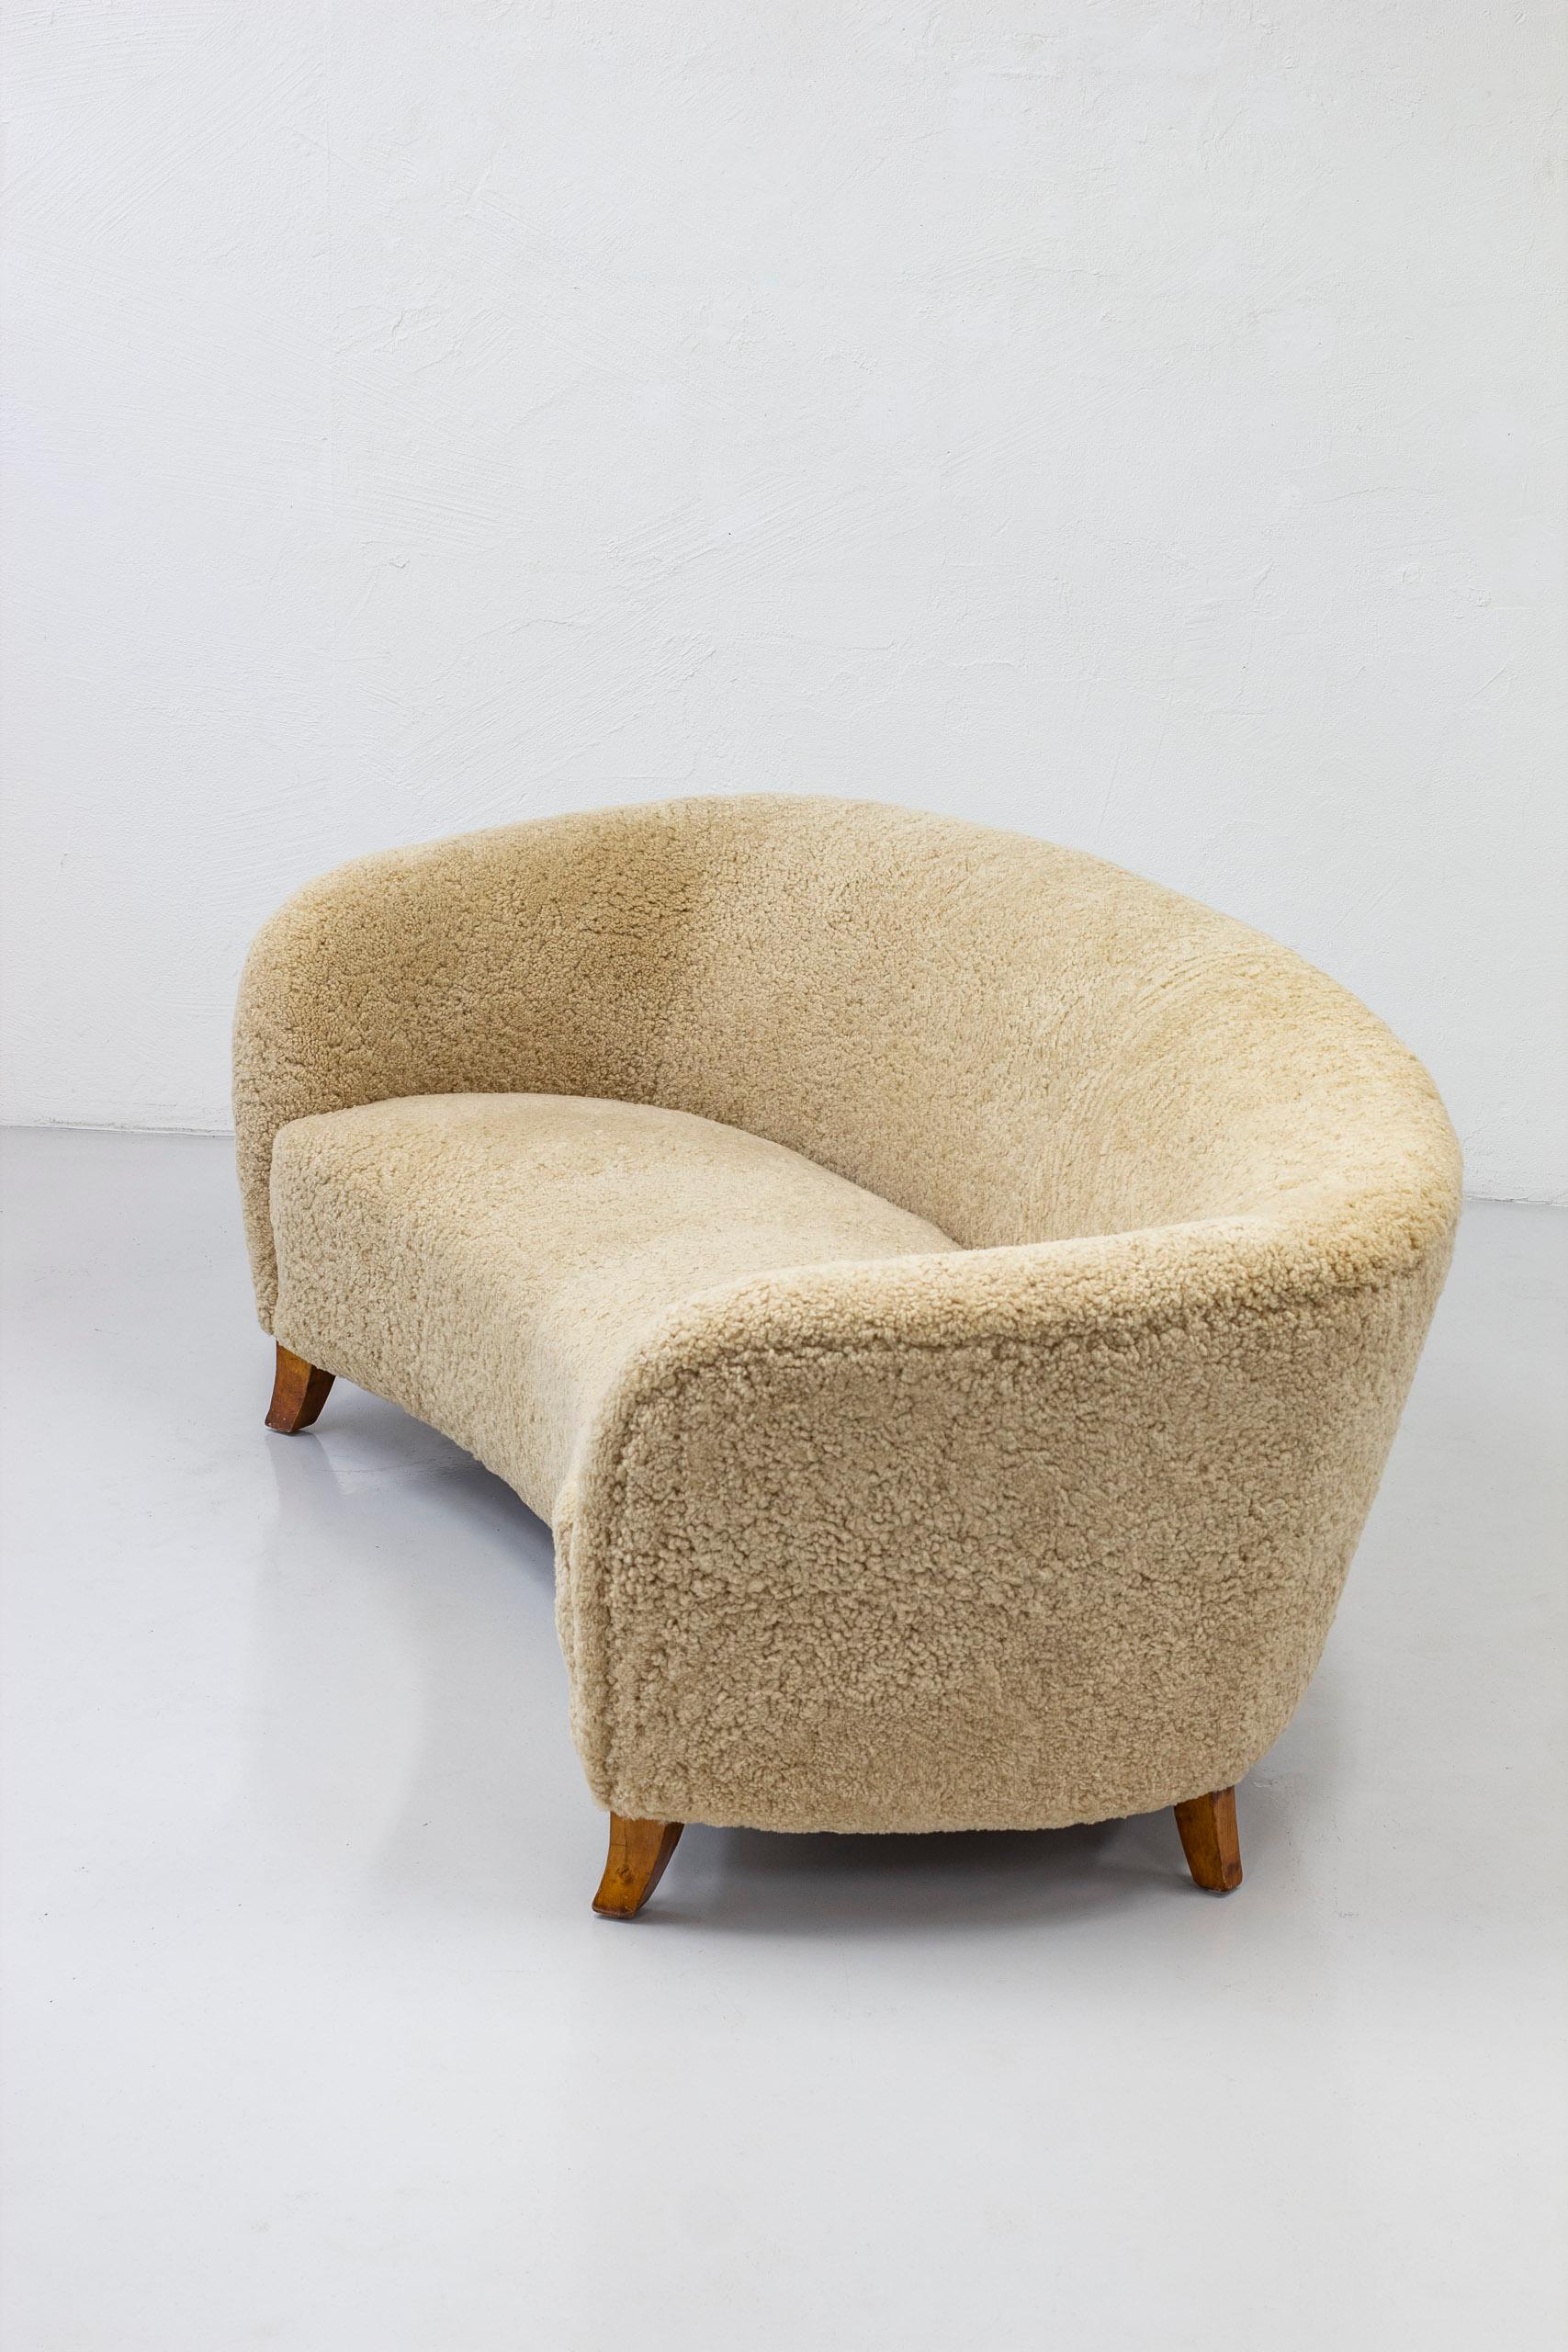 Curved Swedish modern sofa designed and made in Sweden during the 1930-40s. Curved birch legs and new sheep skin upholstery in light beige color. Seating three persons. Great comfort and design. New upholstery without remarks. Legs with light age